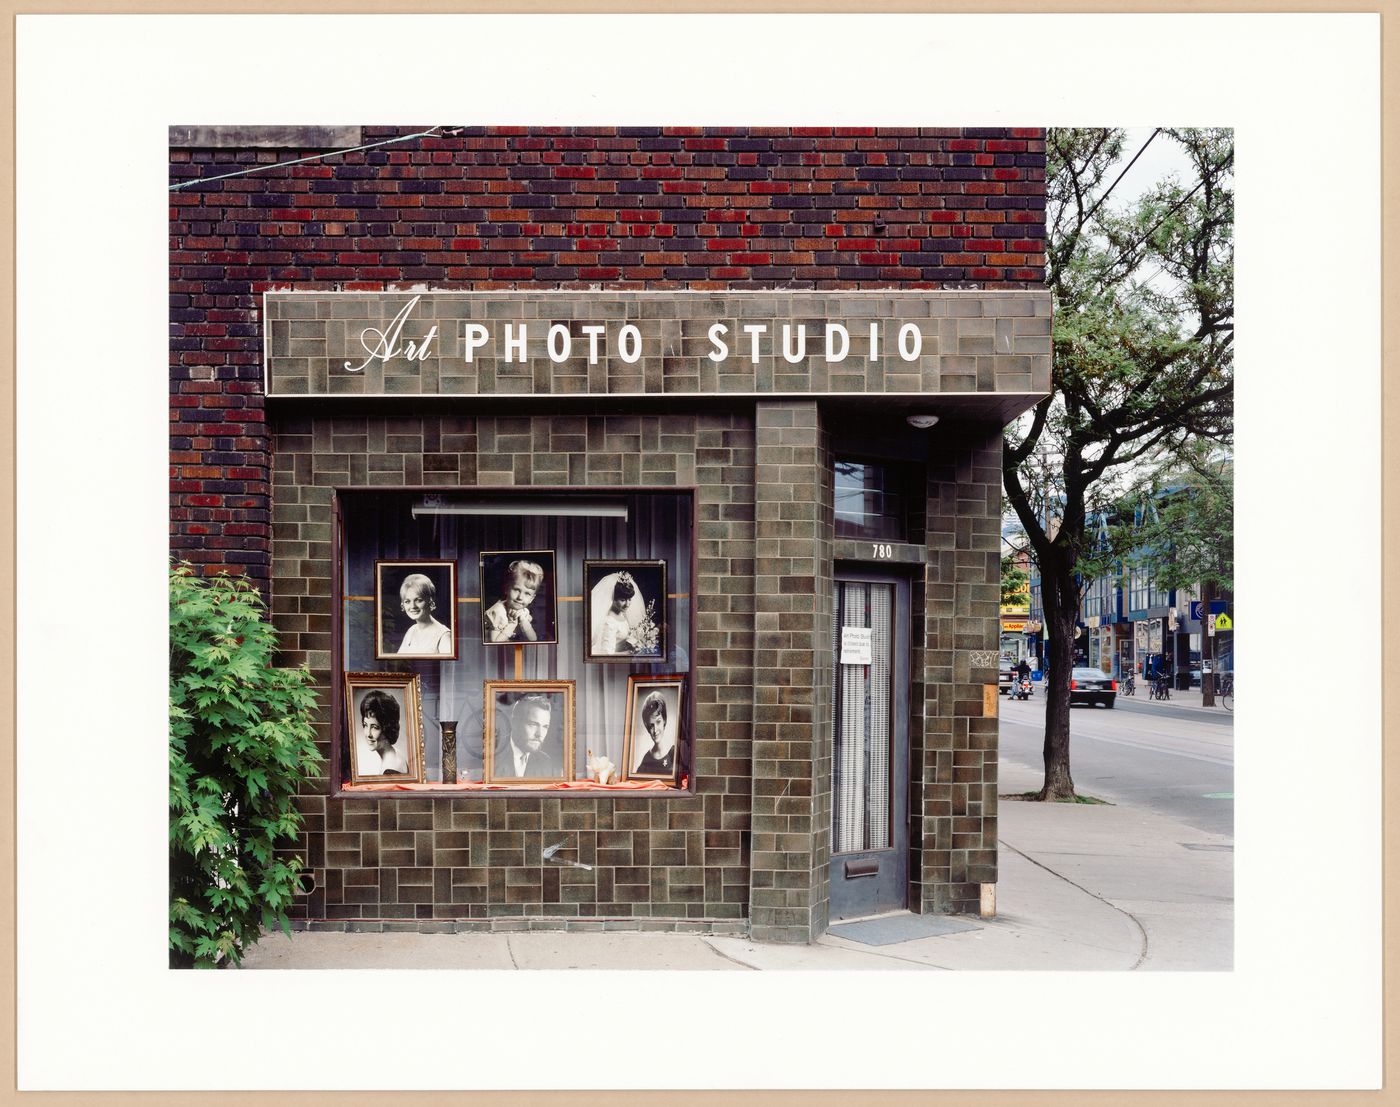 The Disappearance of Darkness: Art Photo Studio: Closed Due to Retirement, Toronto